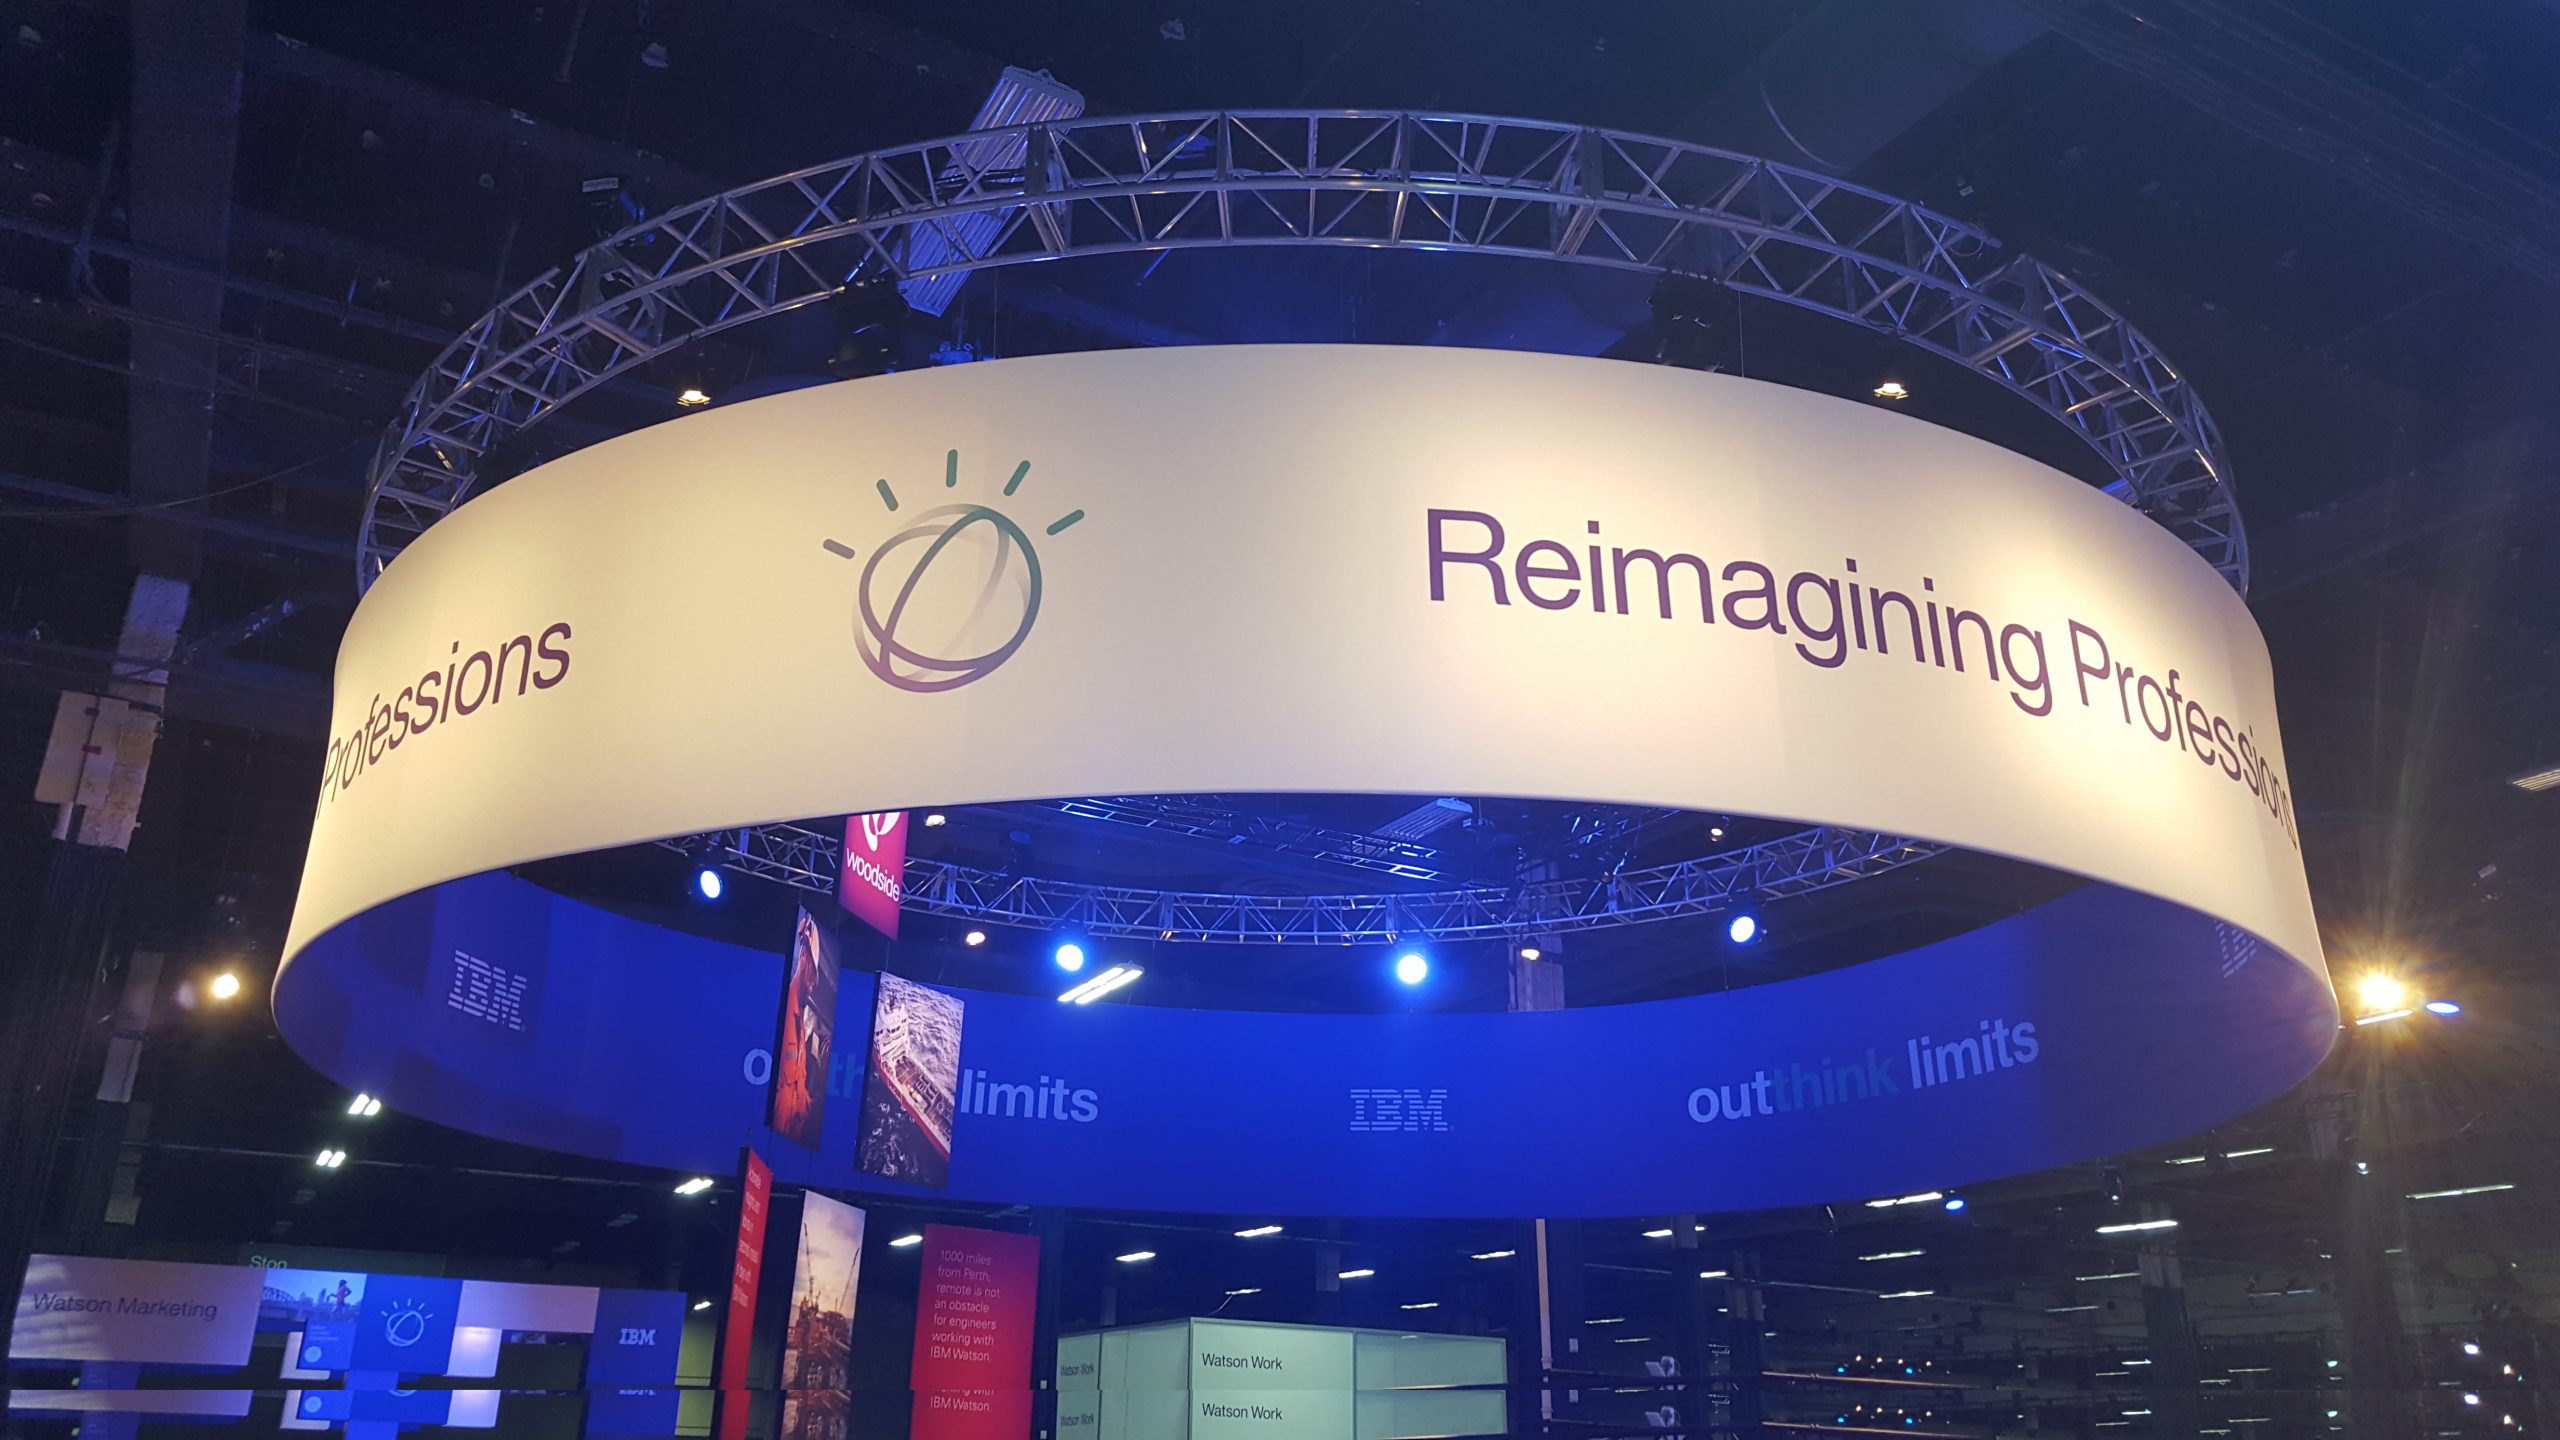 What We Learned from IBM WoW 2016